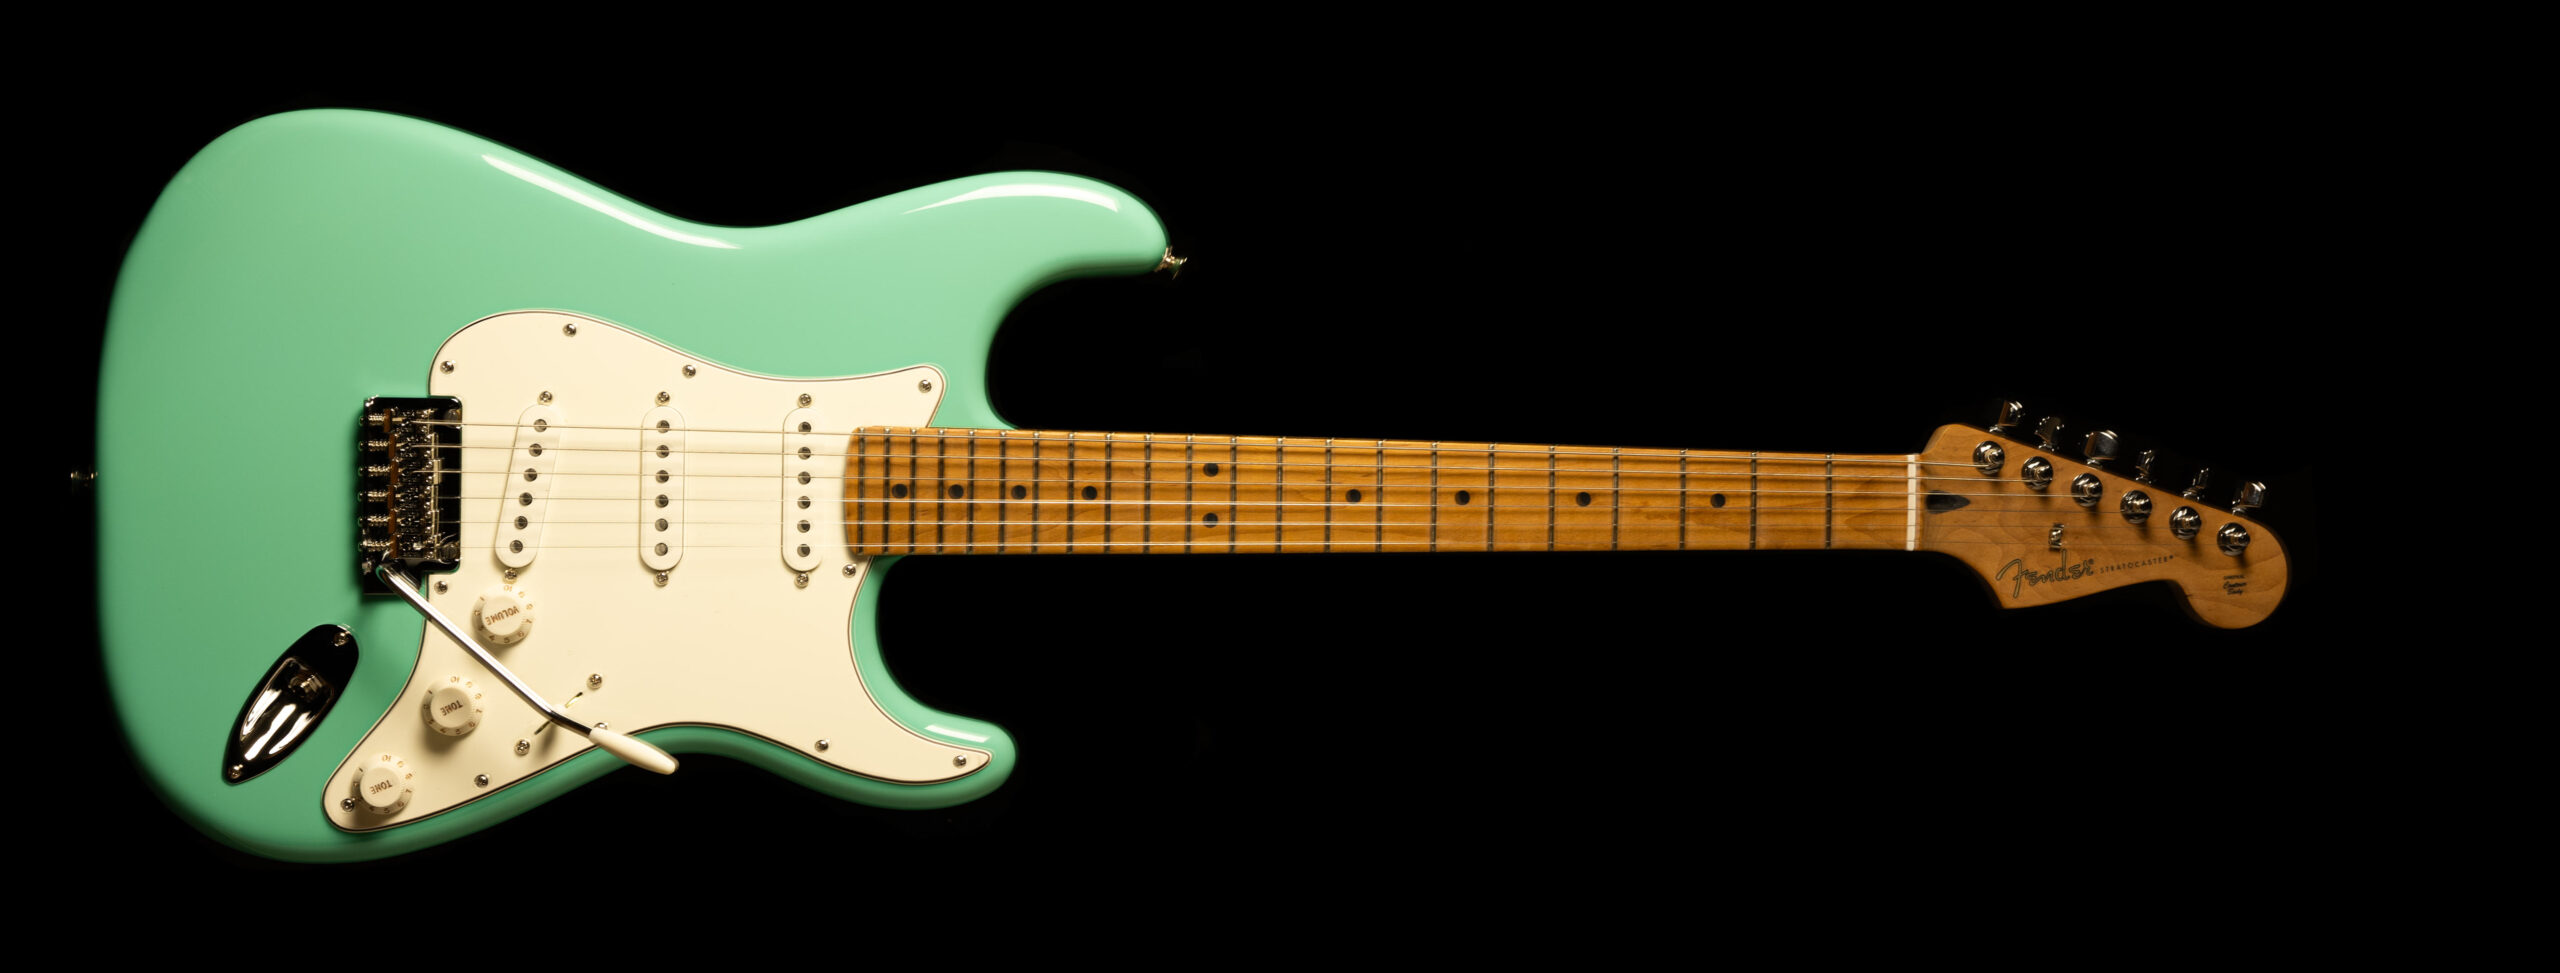 Fender Stratocaster Player Sea Foam Green Roasted MN Limited